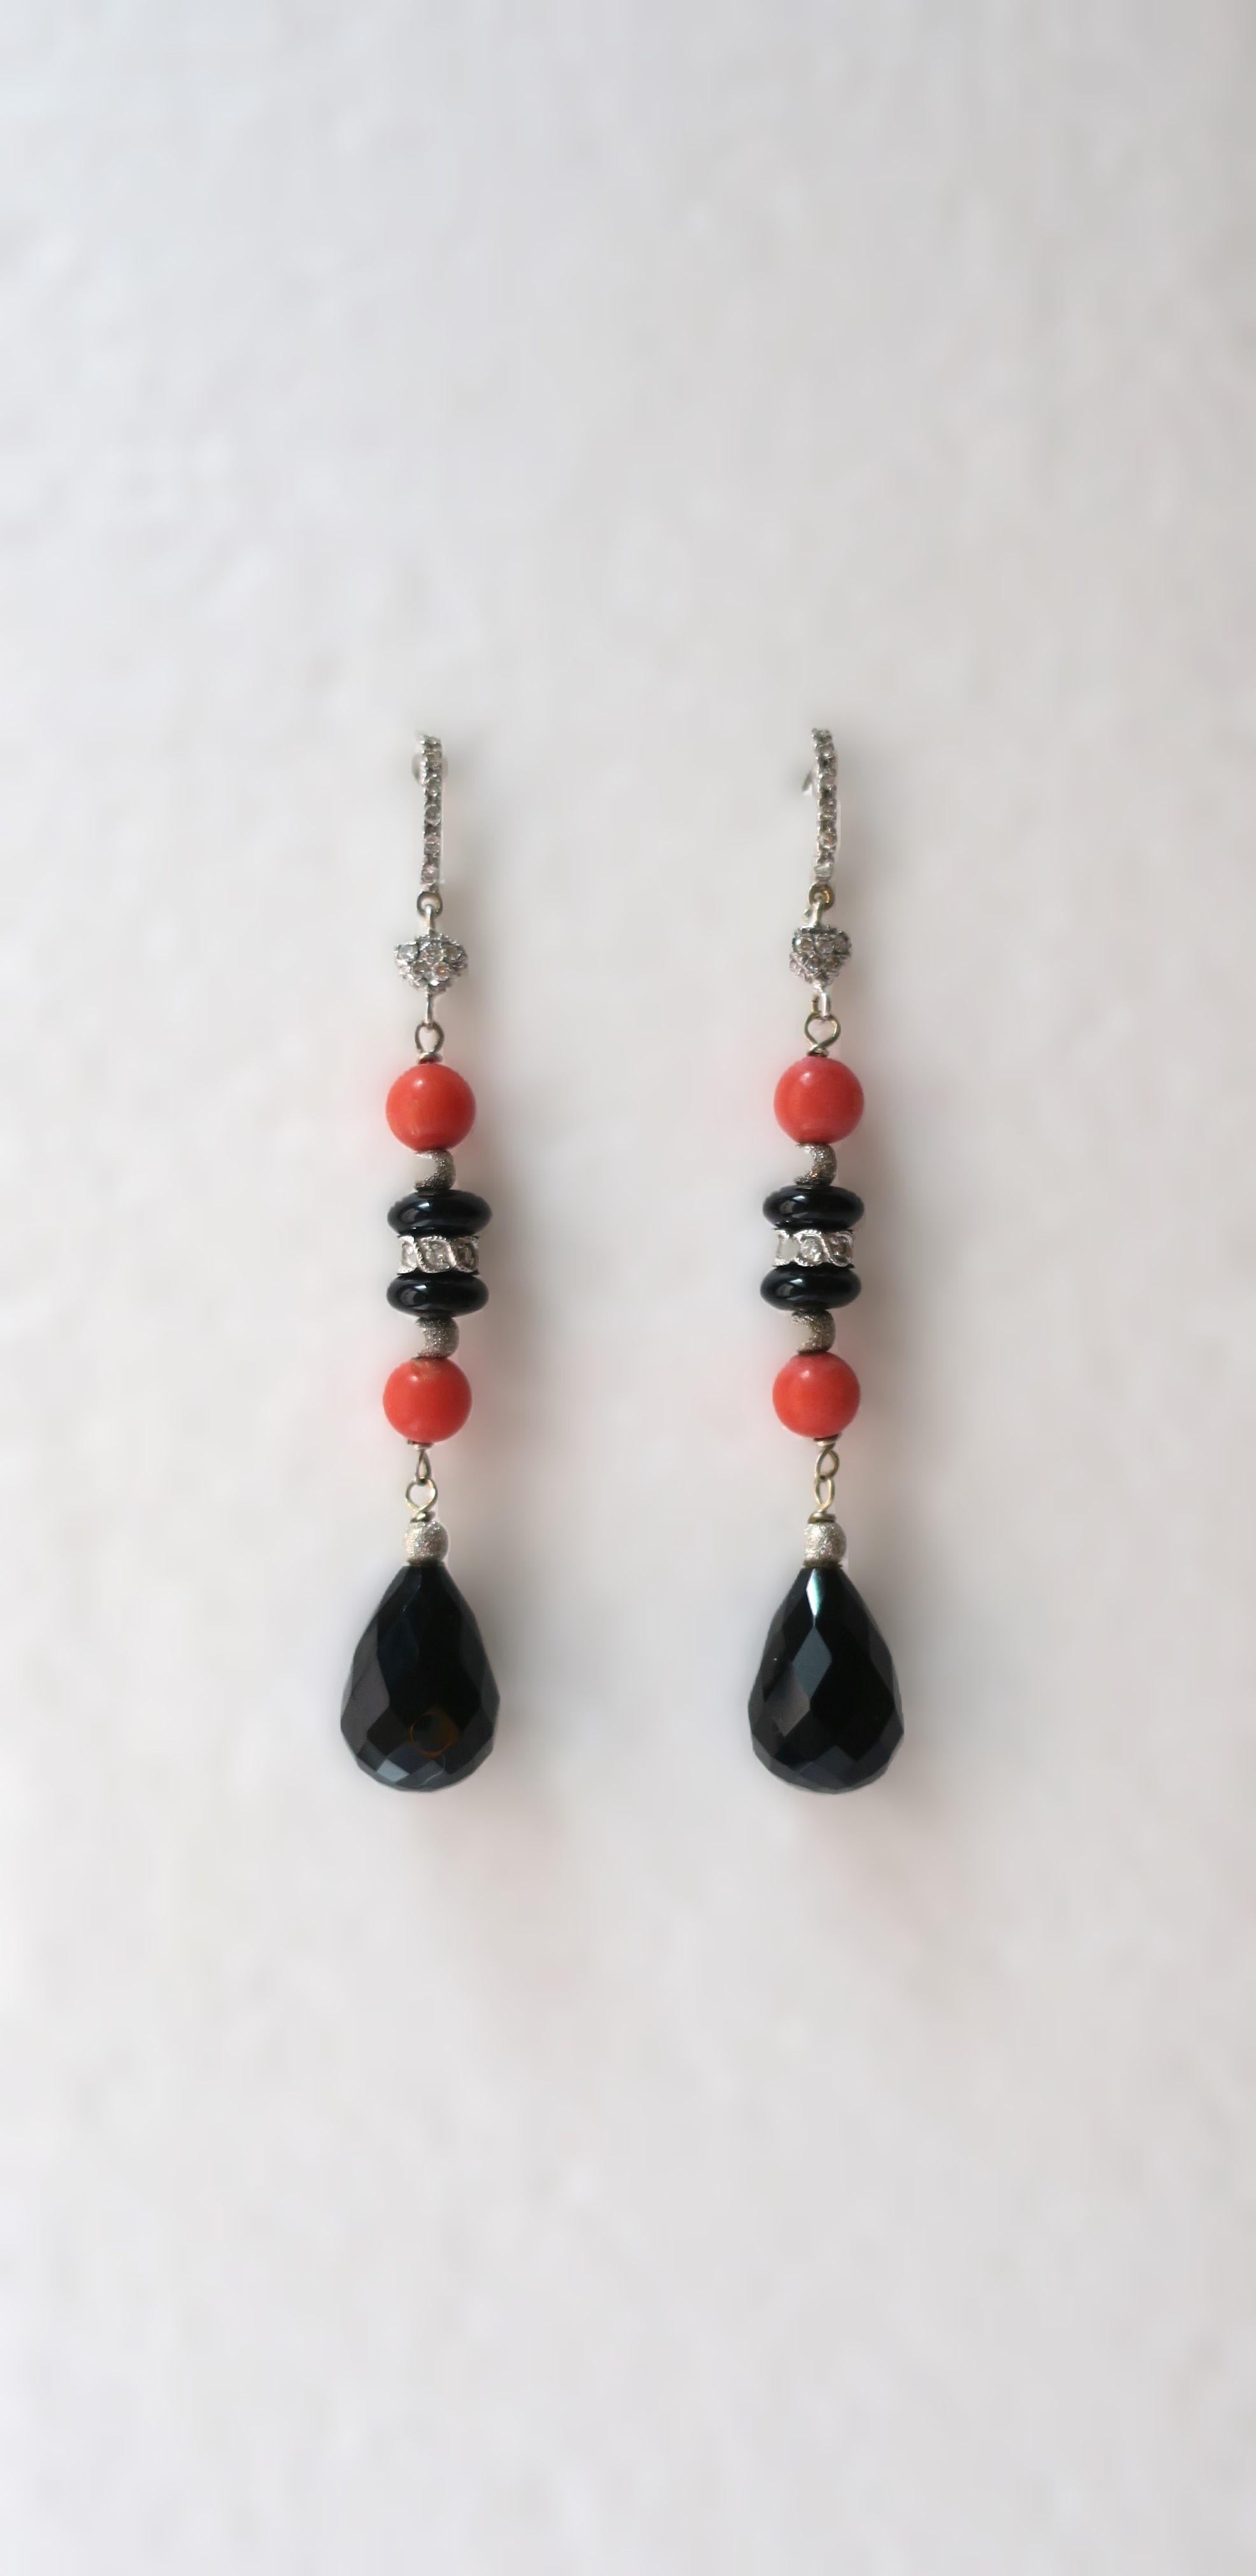 A very beautiful pair of Italian diamond, coral, black onyx, 18-karat white gold dangle earrings, circa early-21st century, early 2000s. Earrings are pave set diamonds, coral, and black onyx, set in 18-karat white gold. The diamonds are round